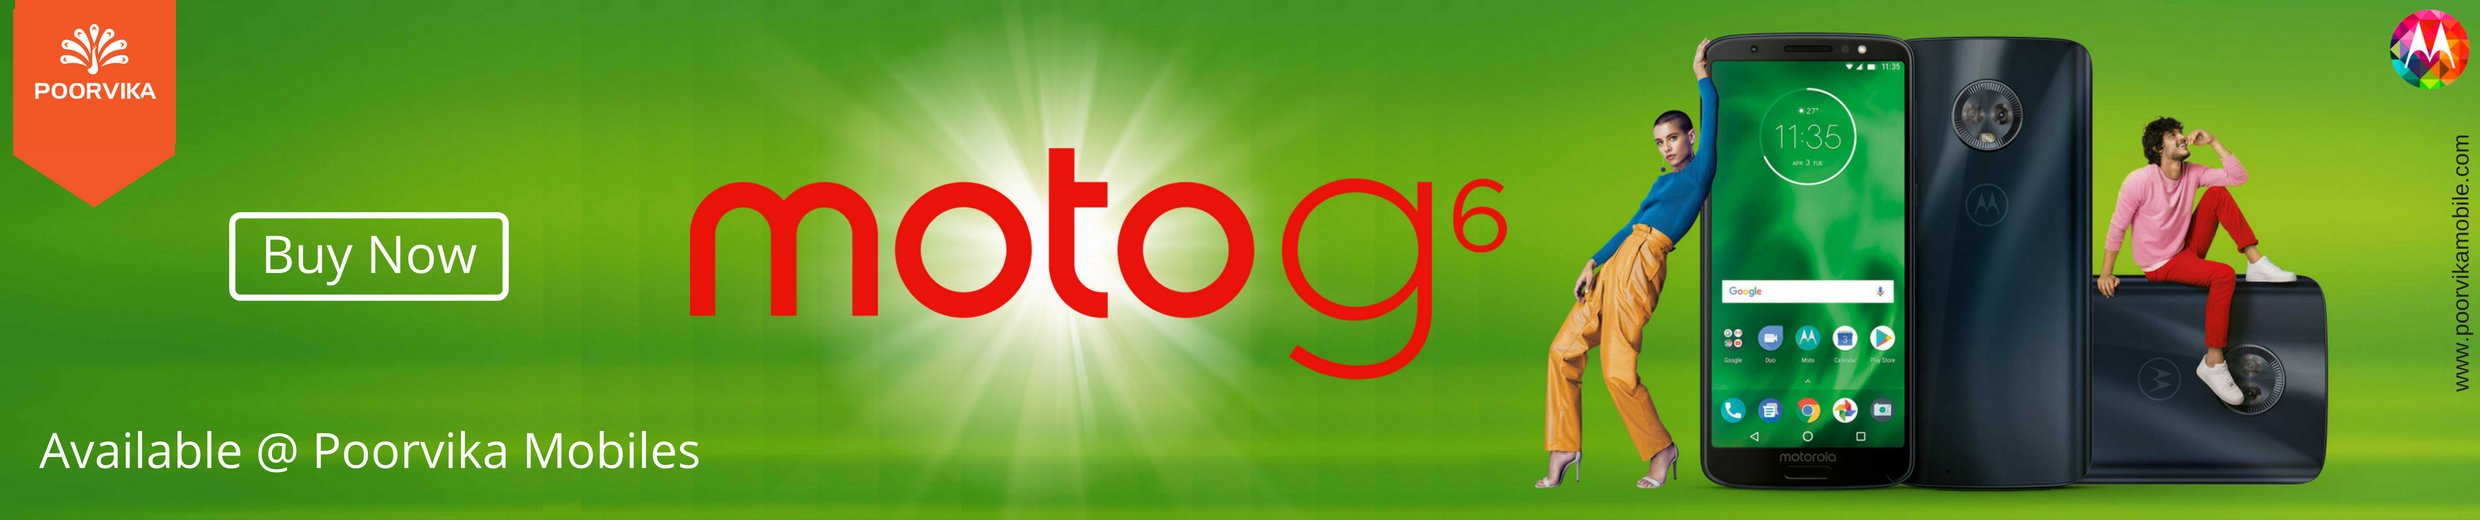 New Moto G6 now available with best offers @ Poorvika Mobiles